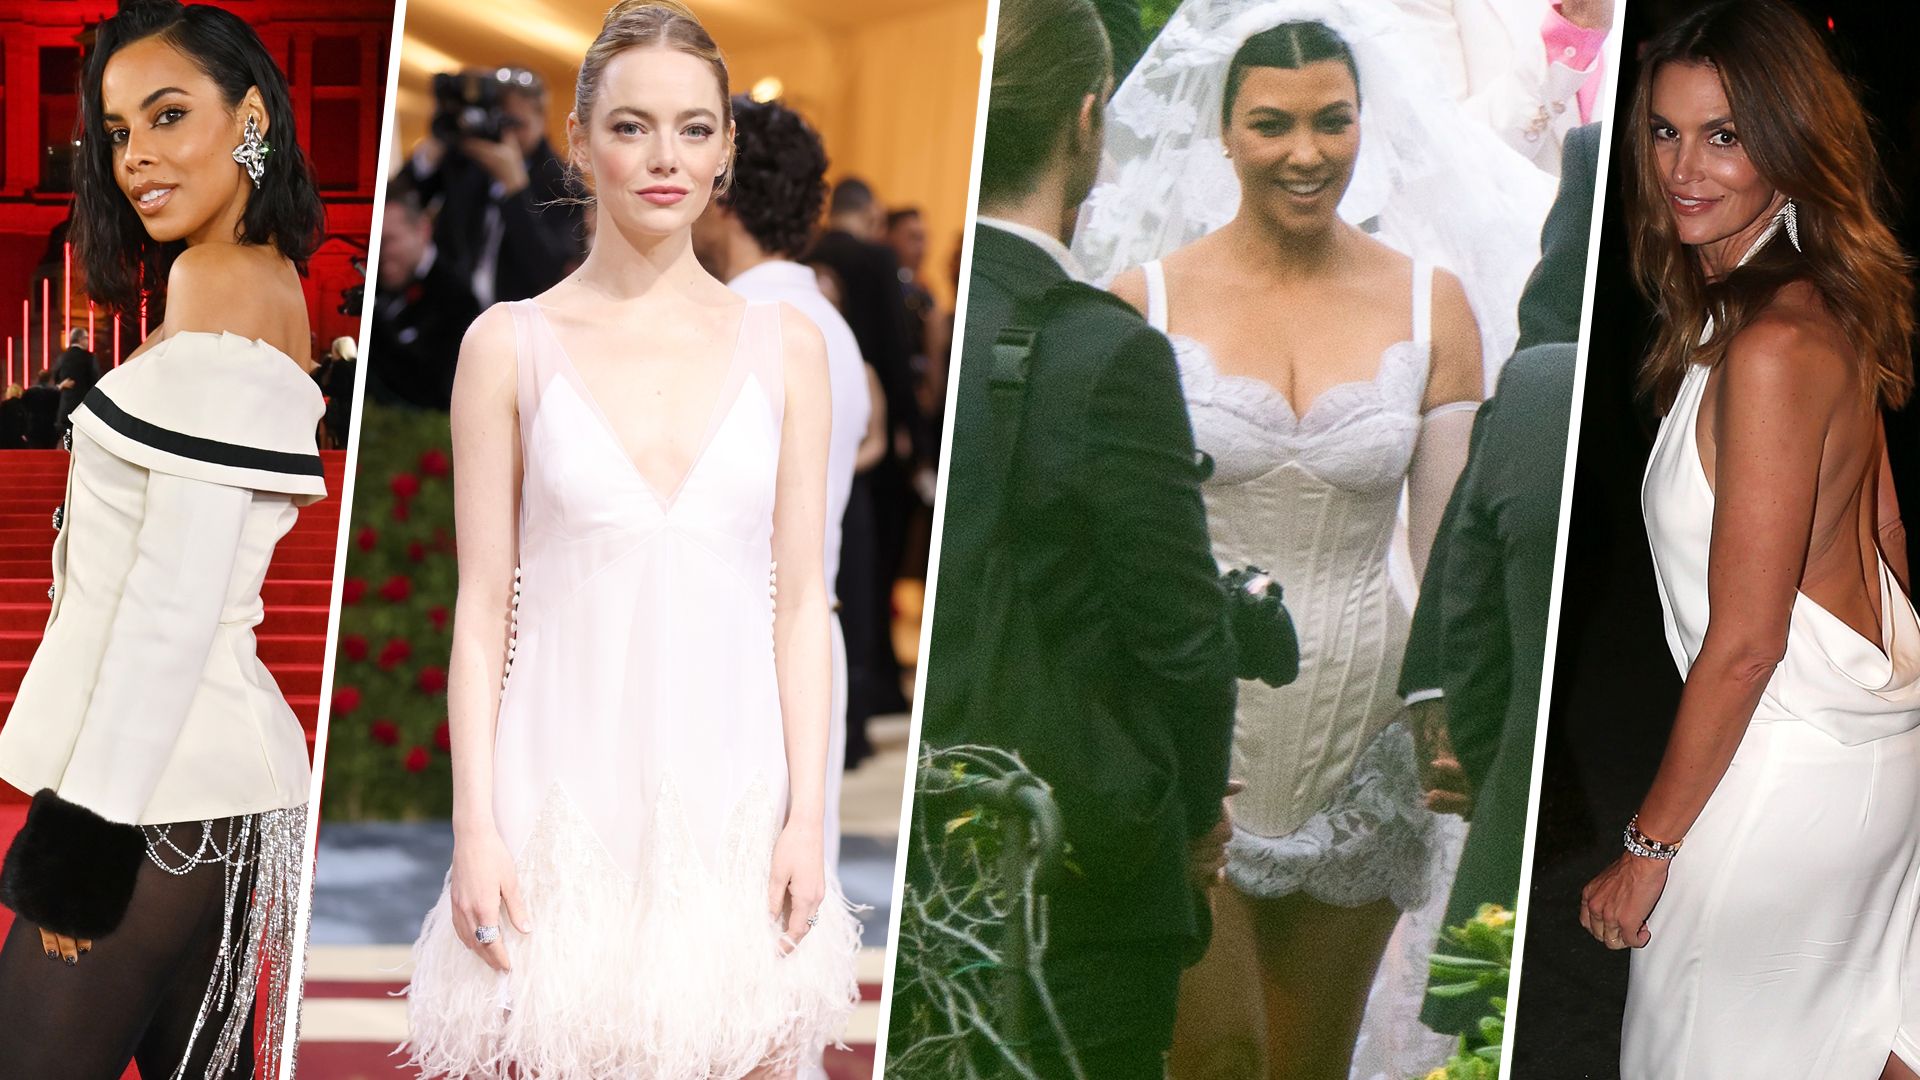 Met Gala 2022: Emma Stone is a vision in a white satin slip dress